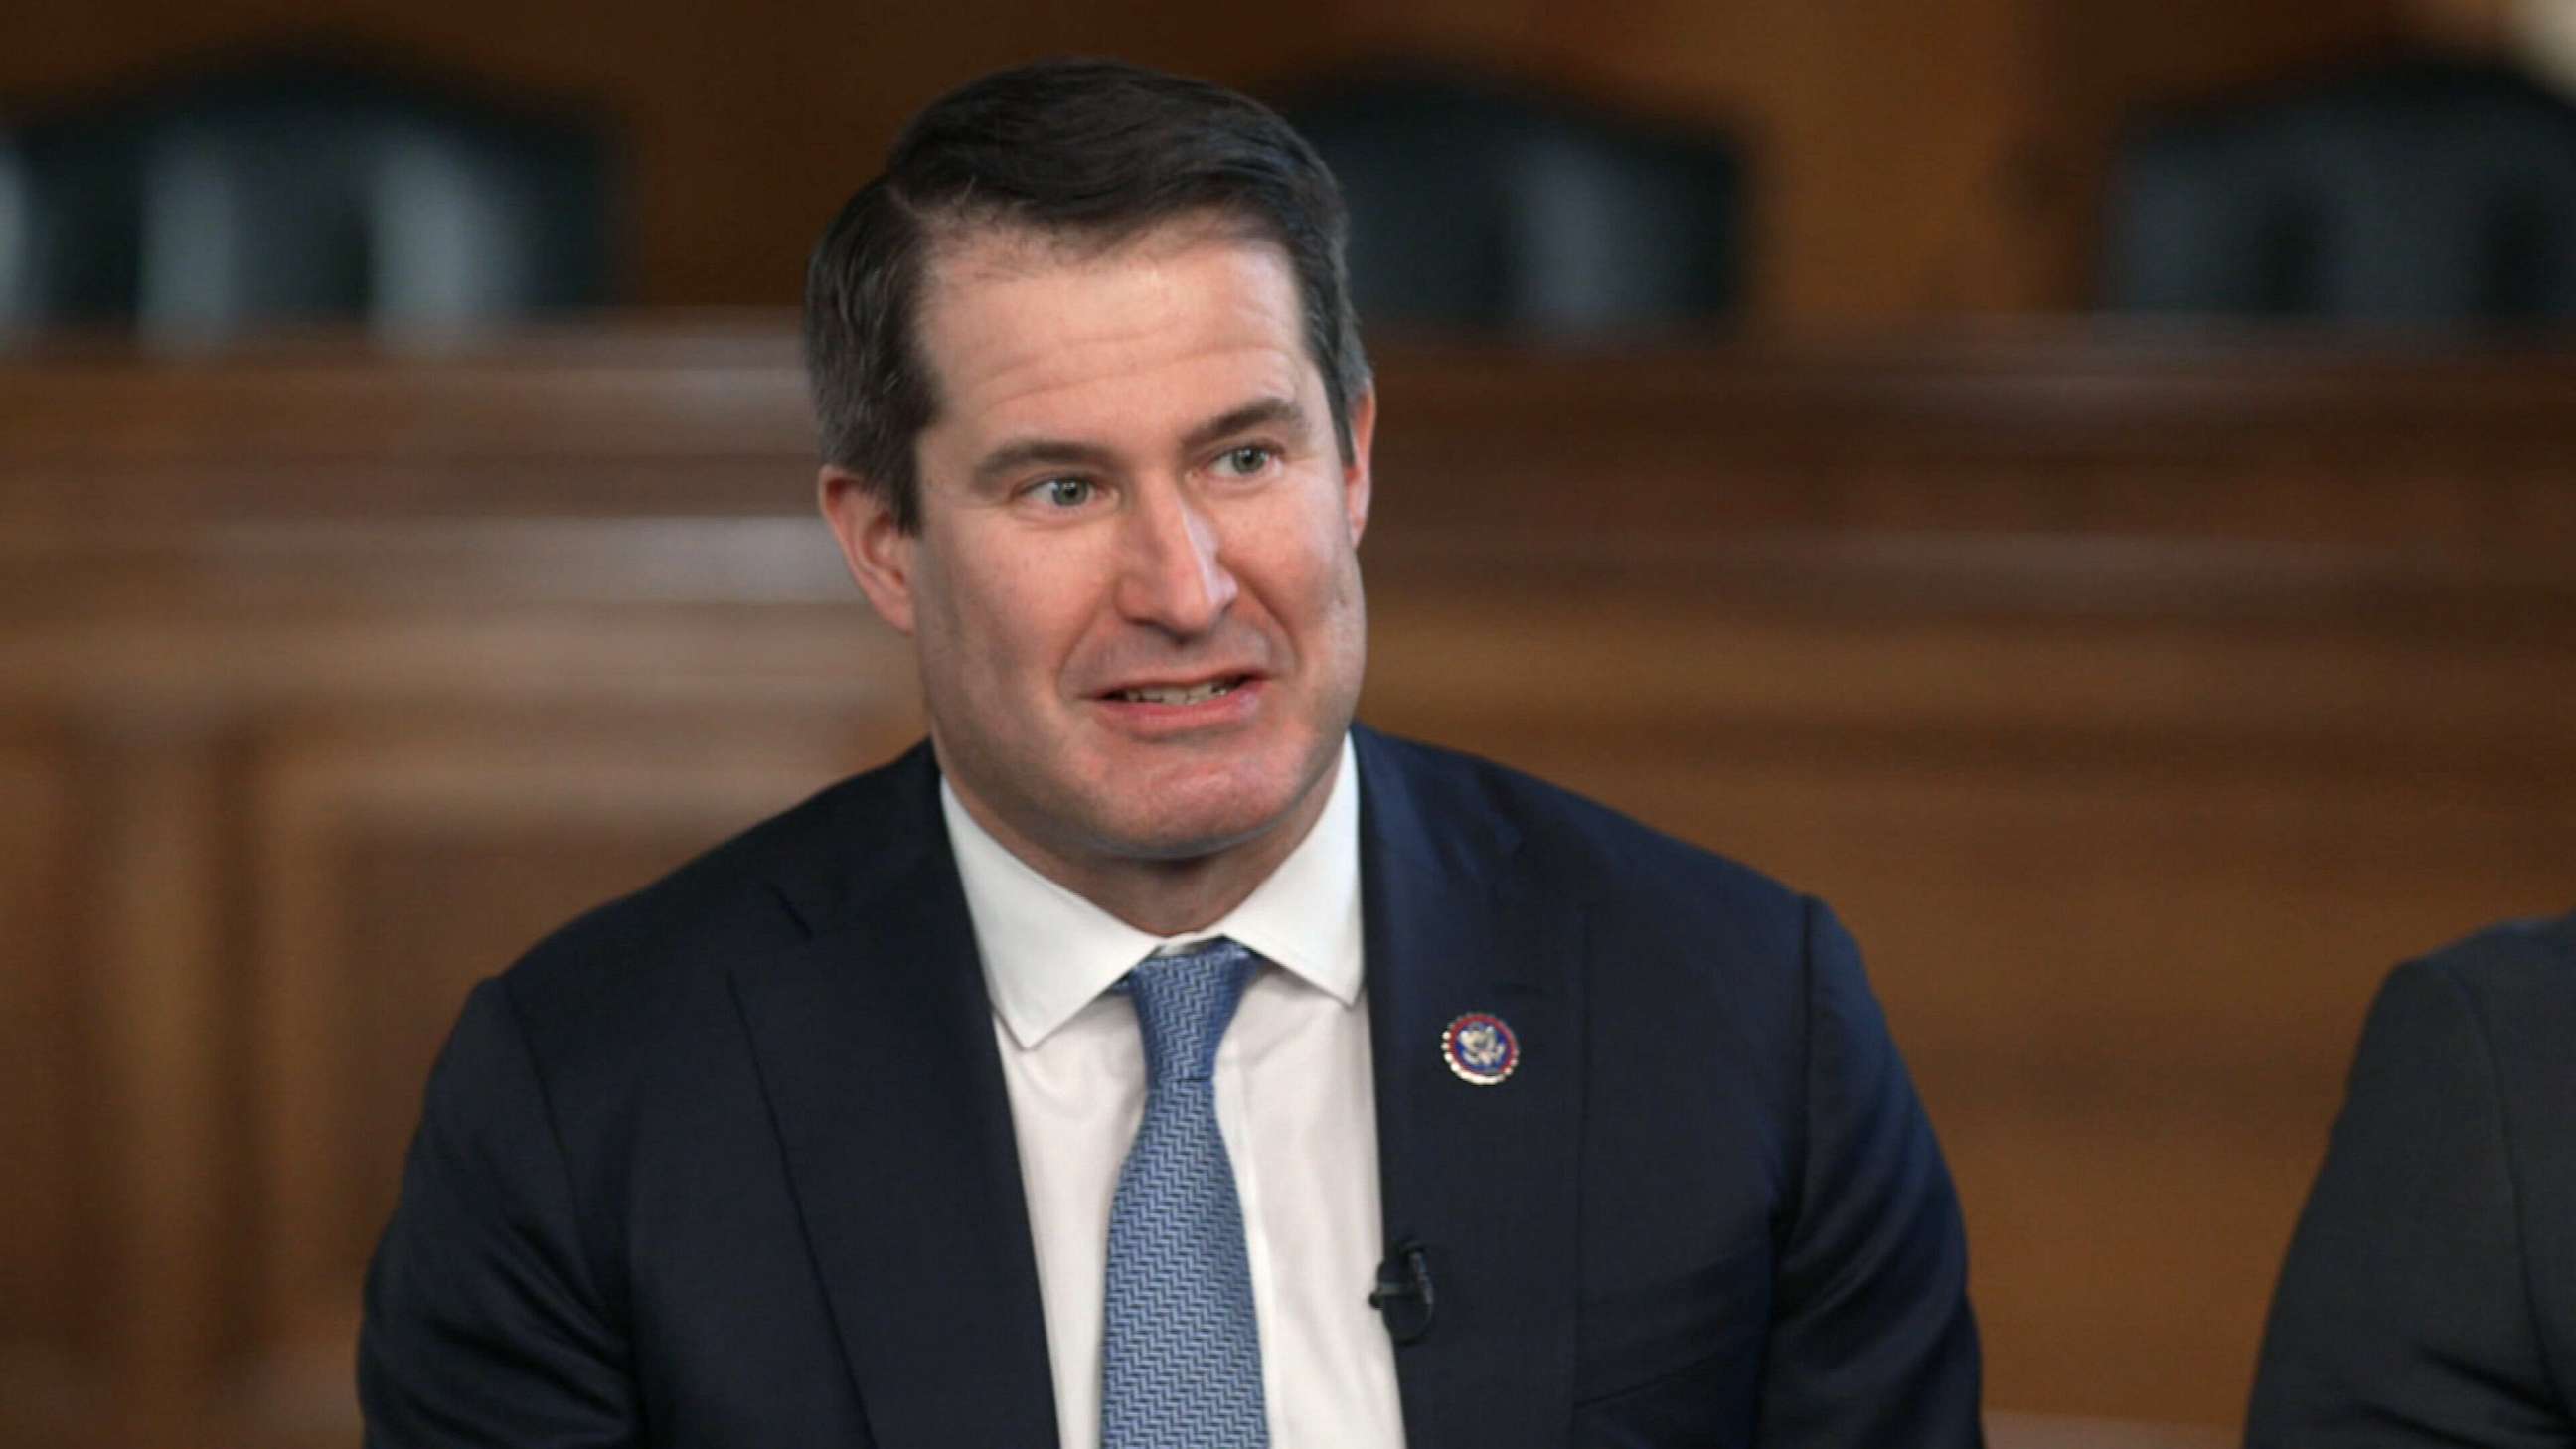 PHOTO: Rep. Seth Moulton talks about mental health during a discussion with ABC News and other lawmakers, March 23, 2023.